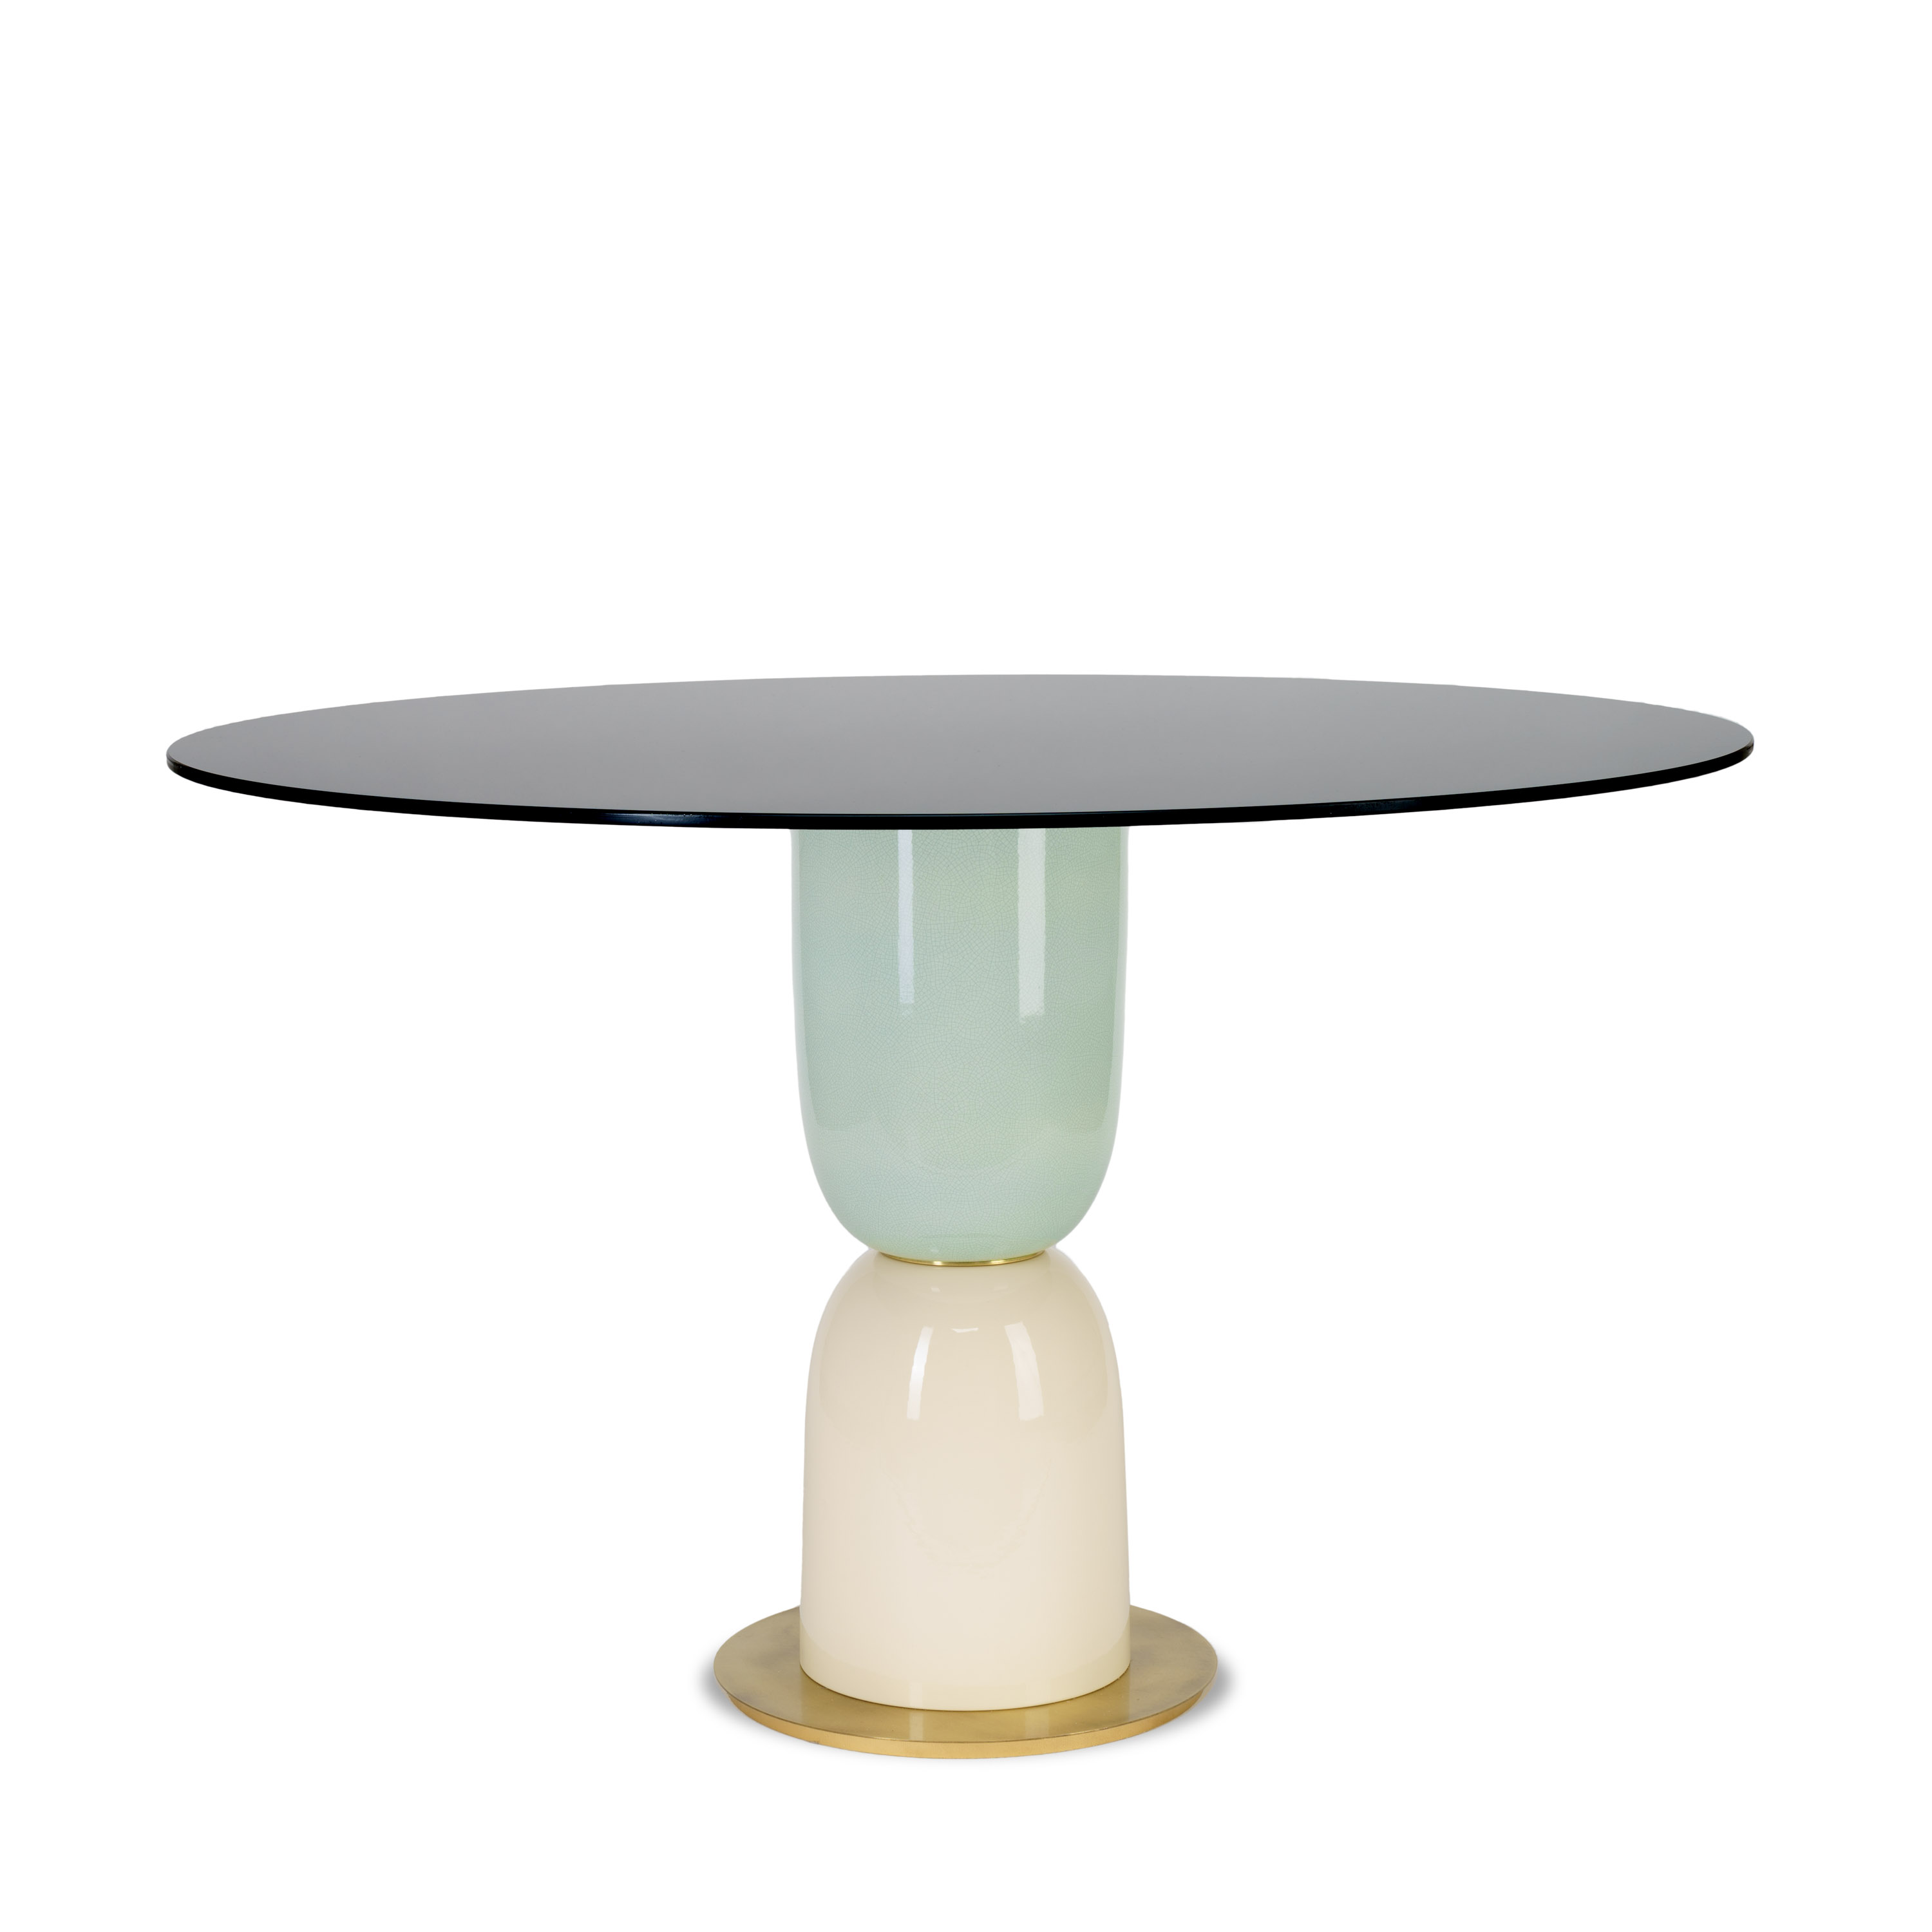 Pins - Round dining table